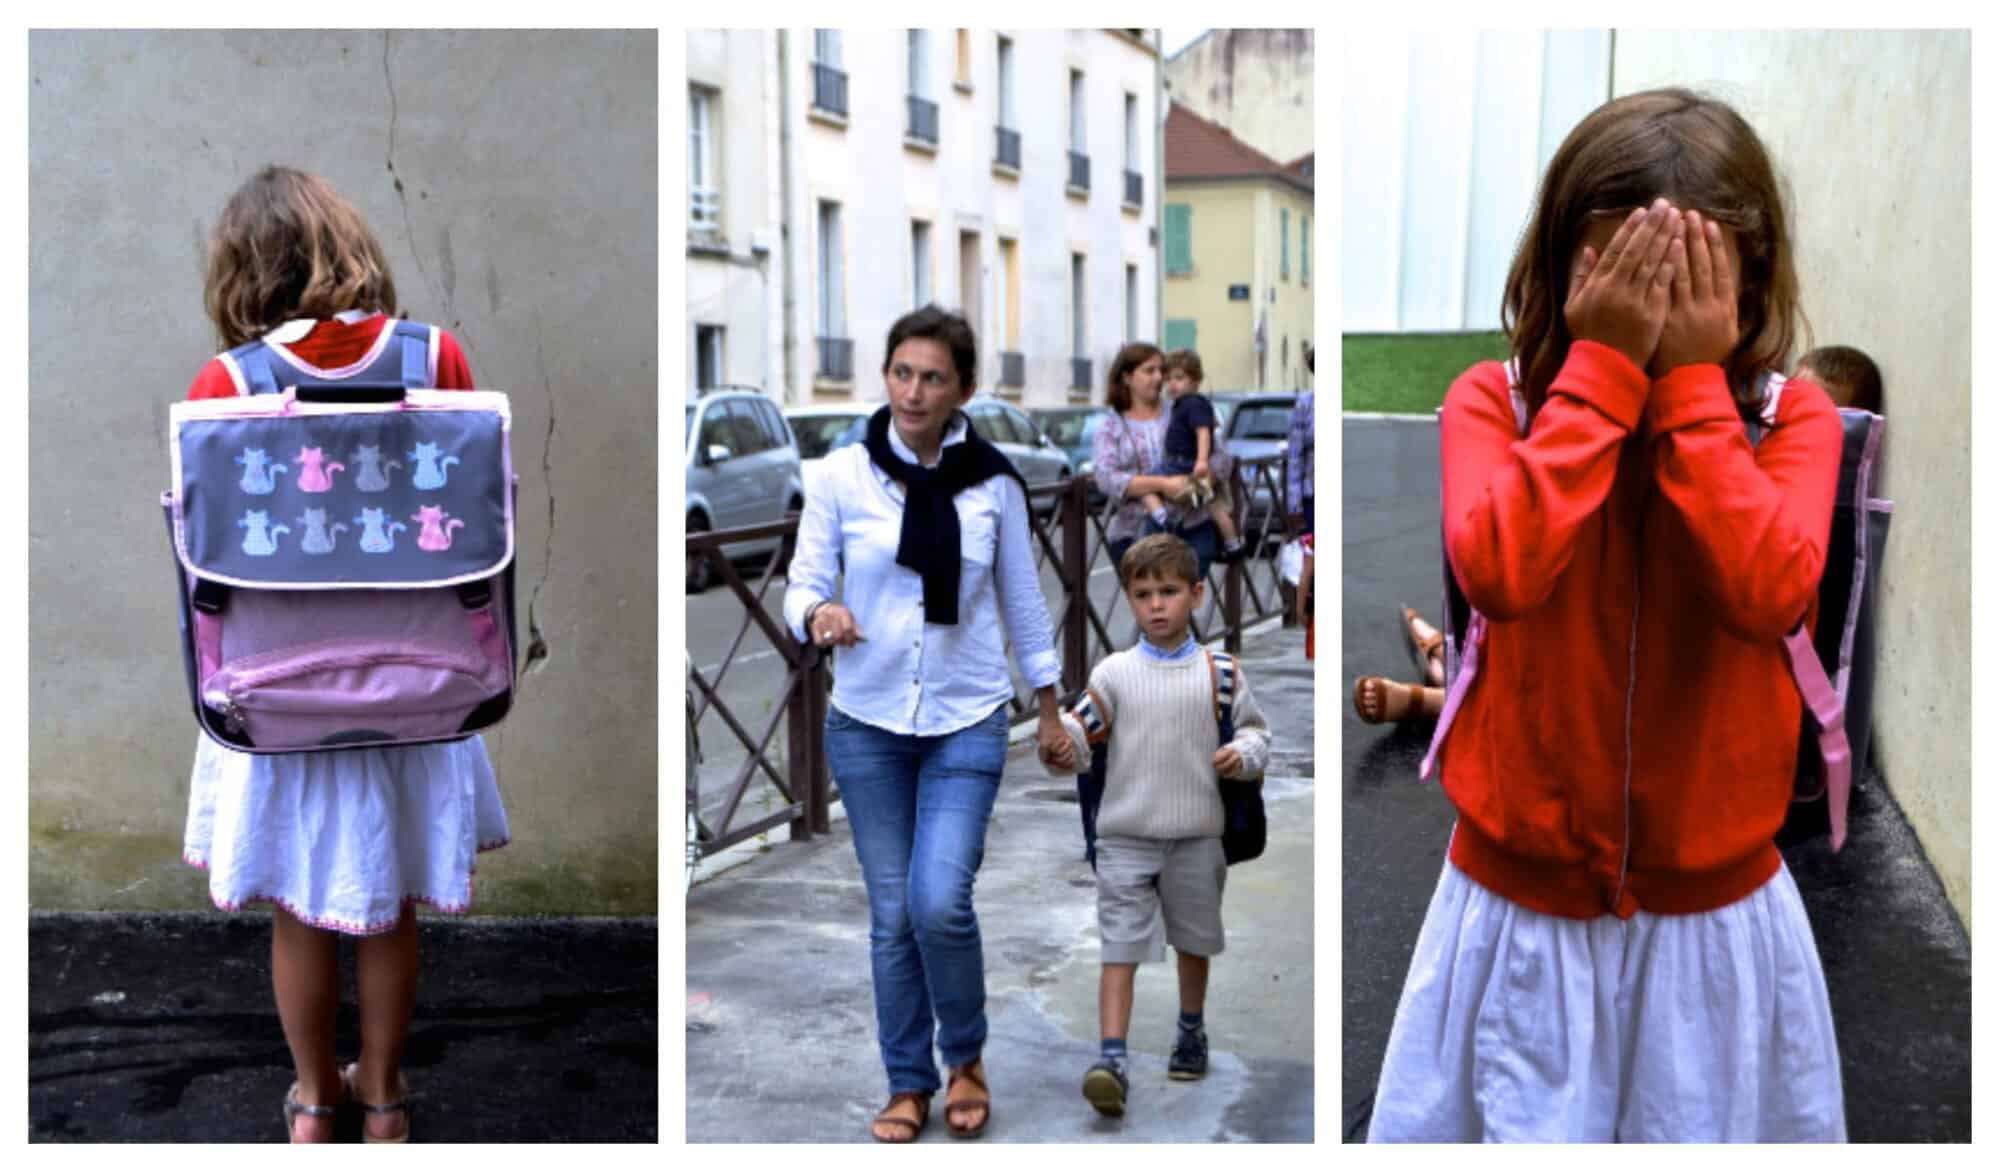 Left: a young girl with her back facing the camera showing off her pastel backpack; center: a woman with jeans, a white shirt and cardigan over her shoulders walks a small boy to school; right: a girl in a red sweatshirt playful covers her face with her hands.